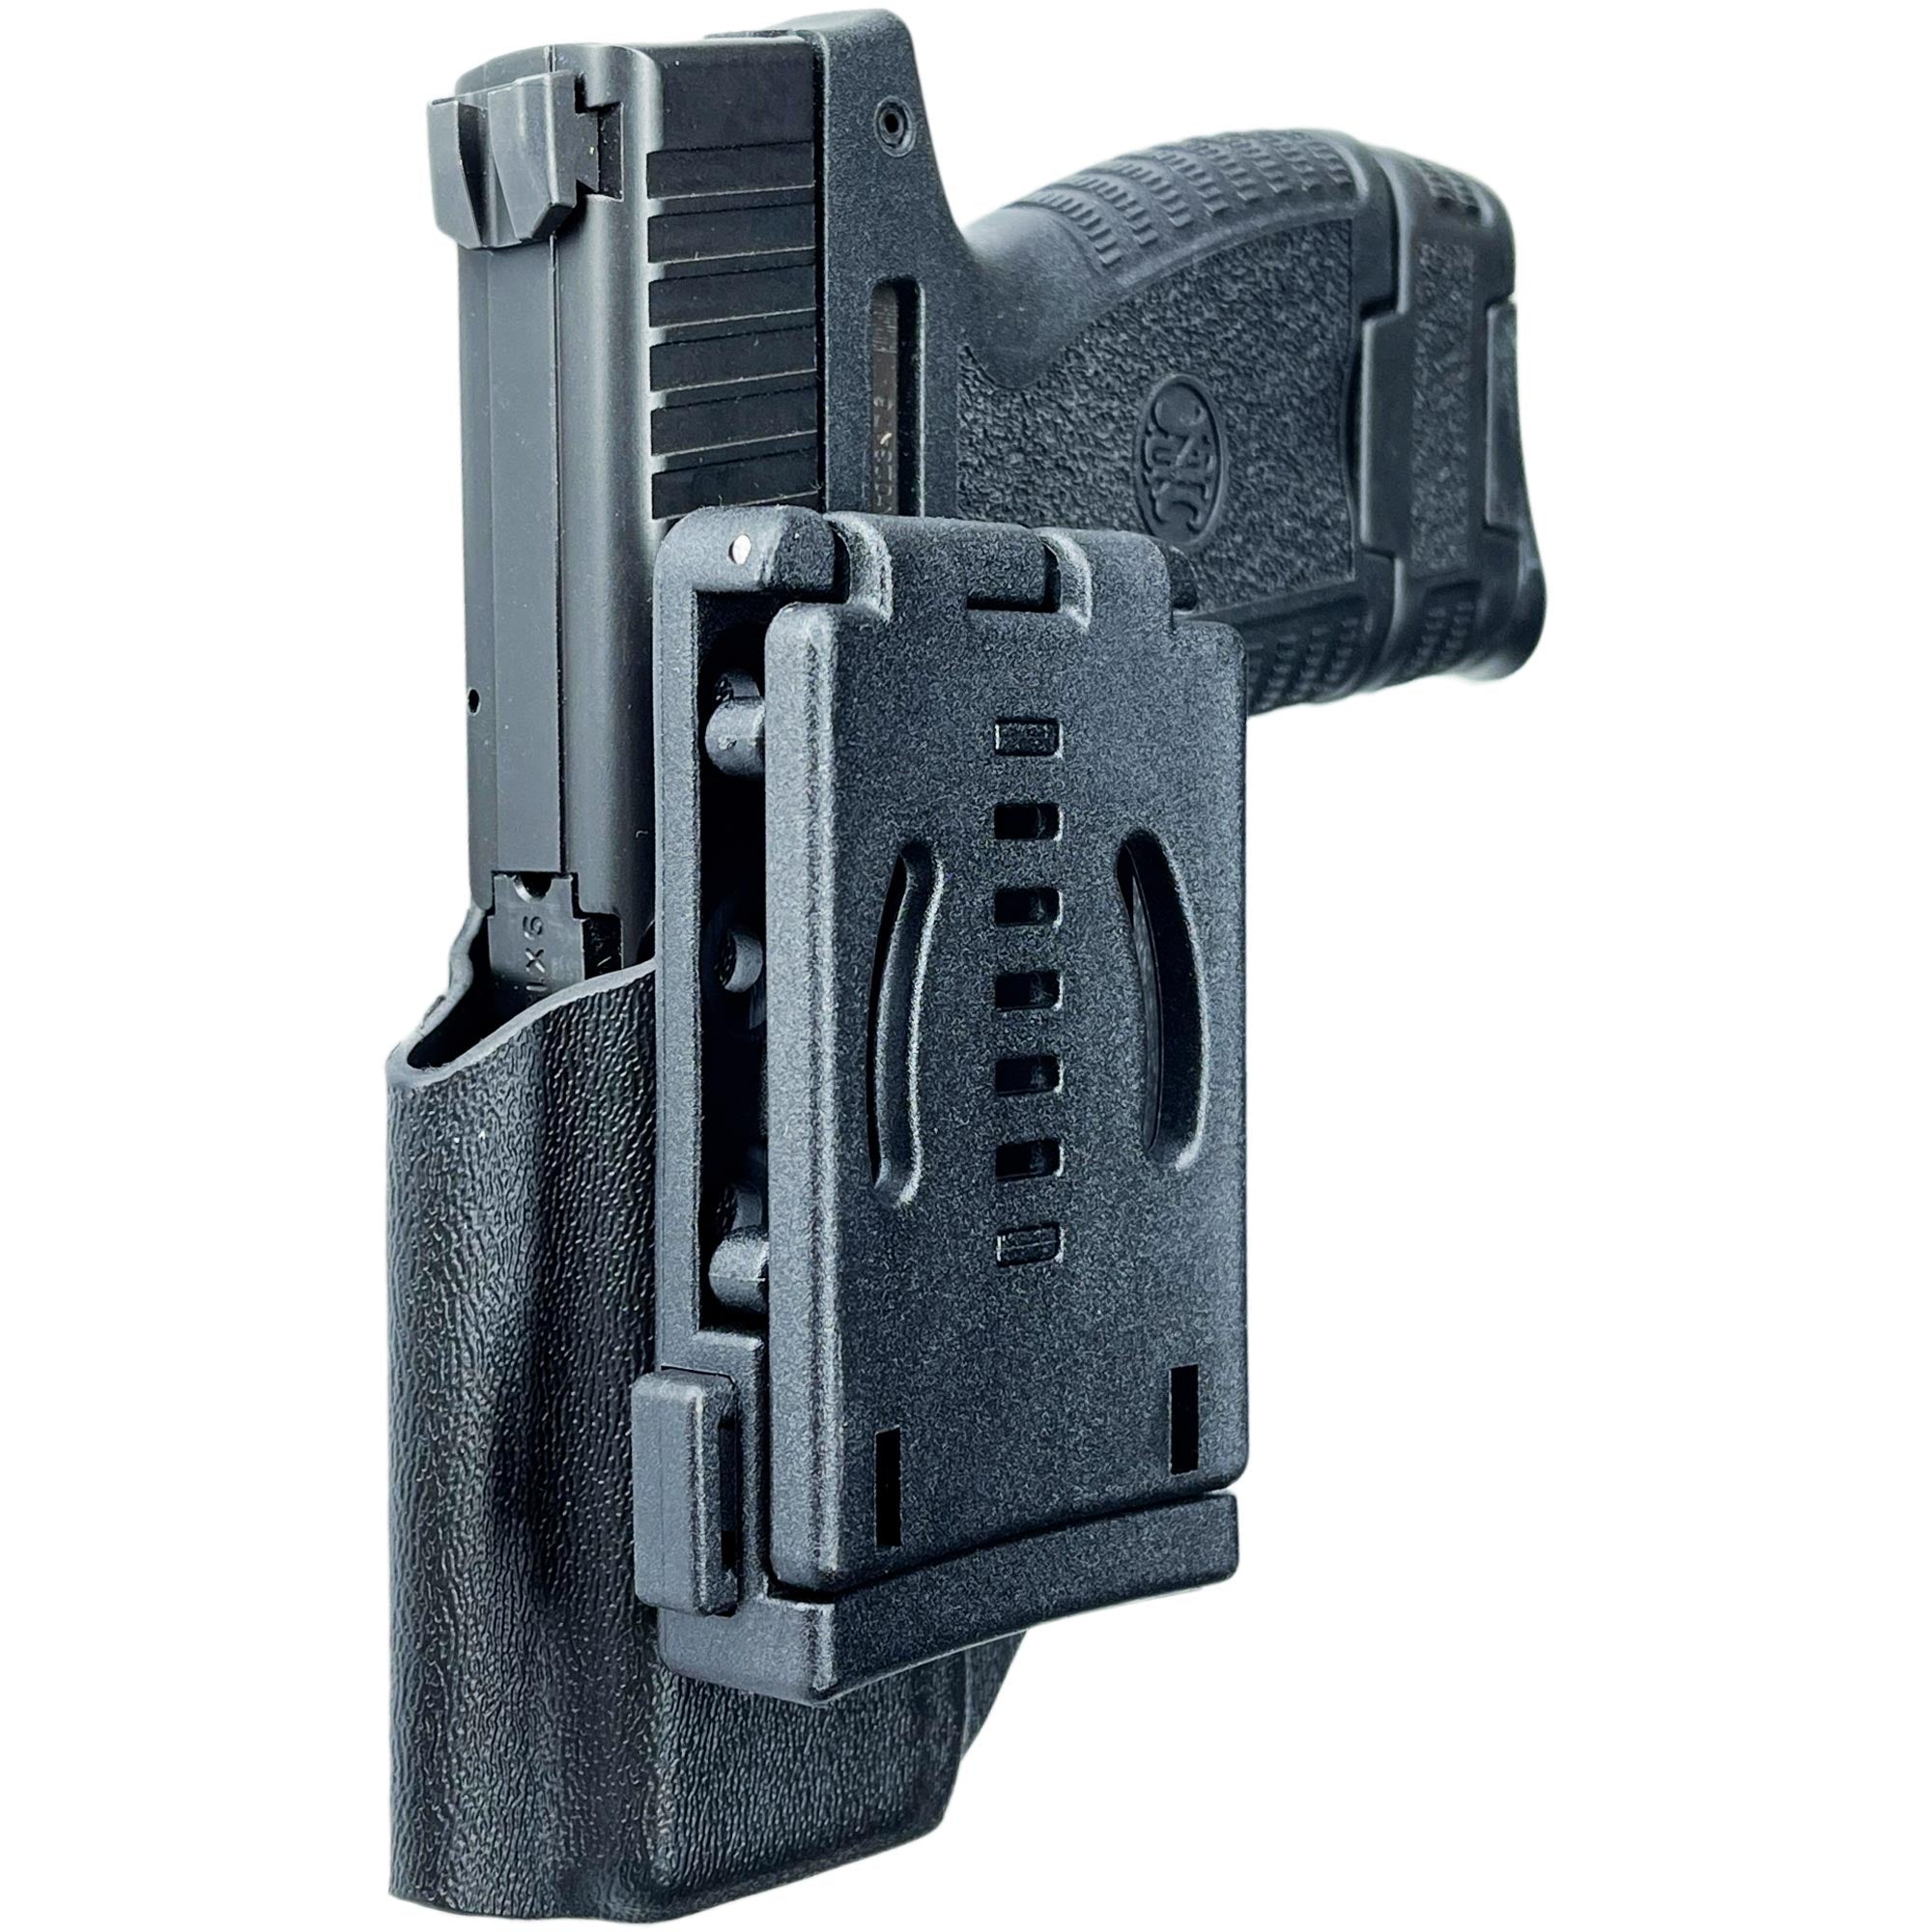 Pro IDPA Competition Holster for FN 503 - Black 2